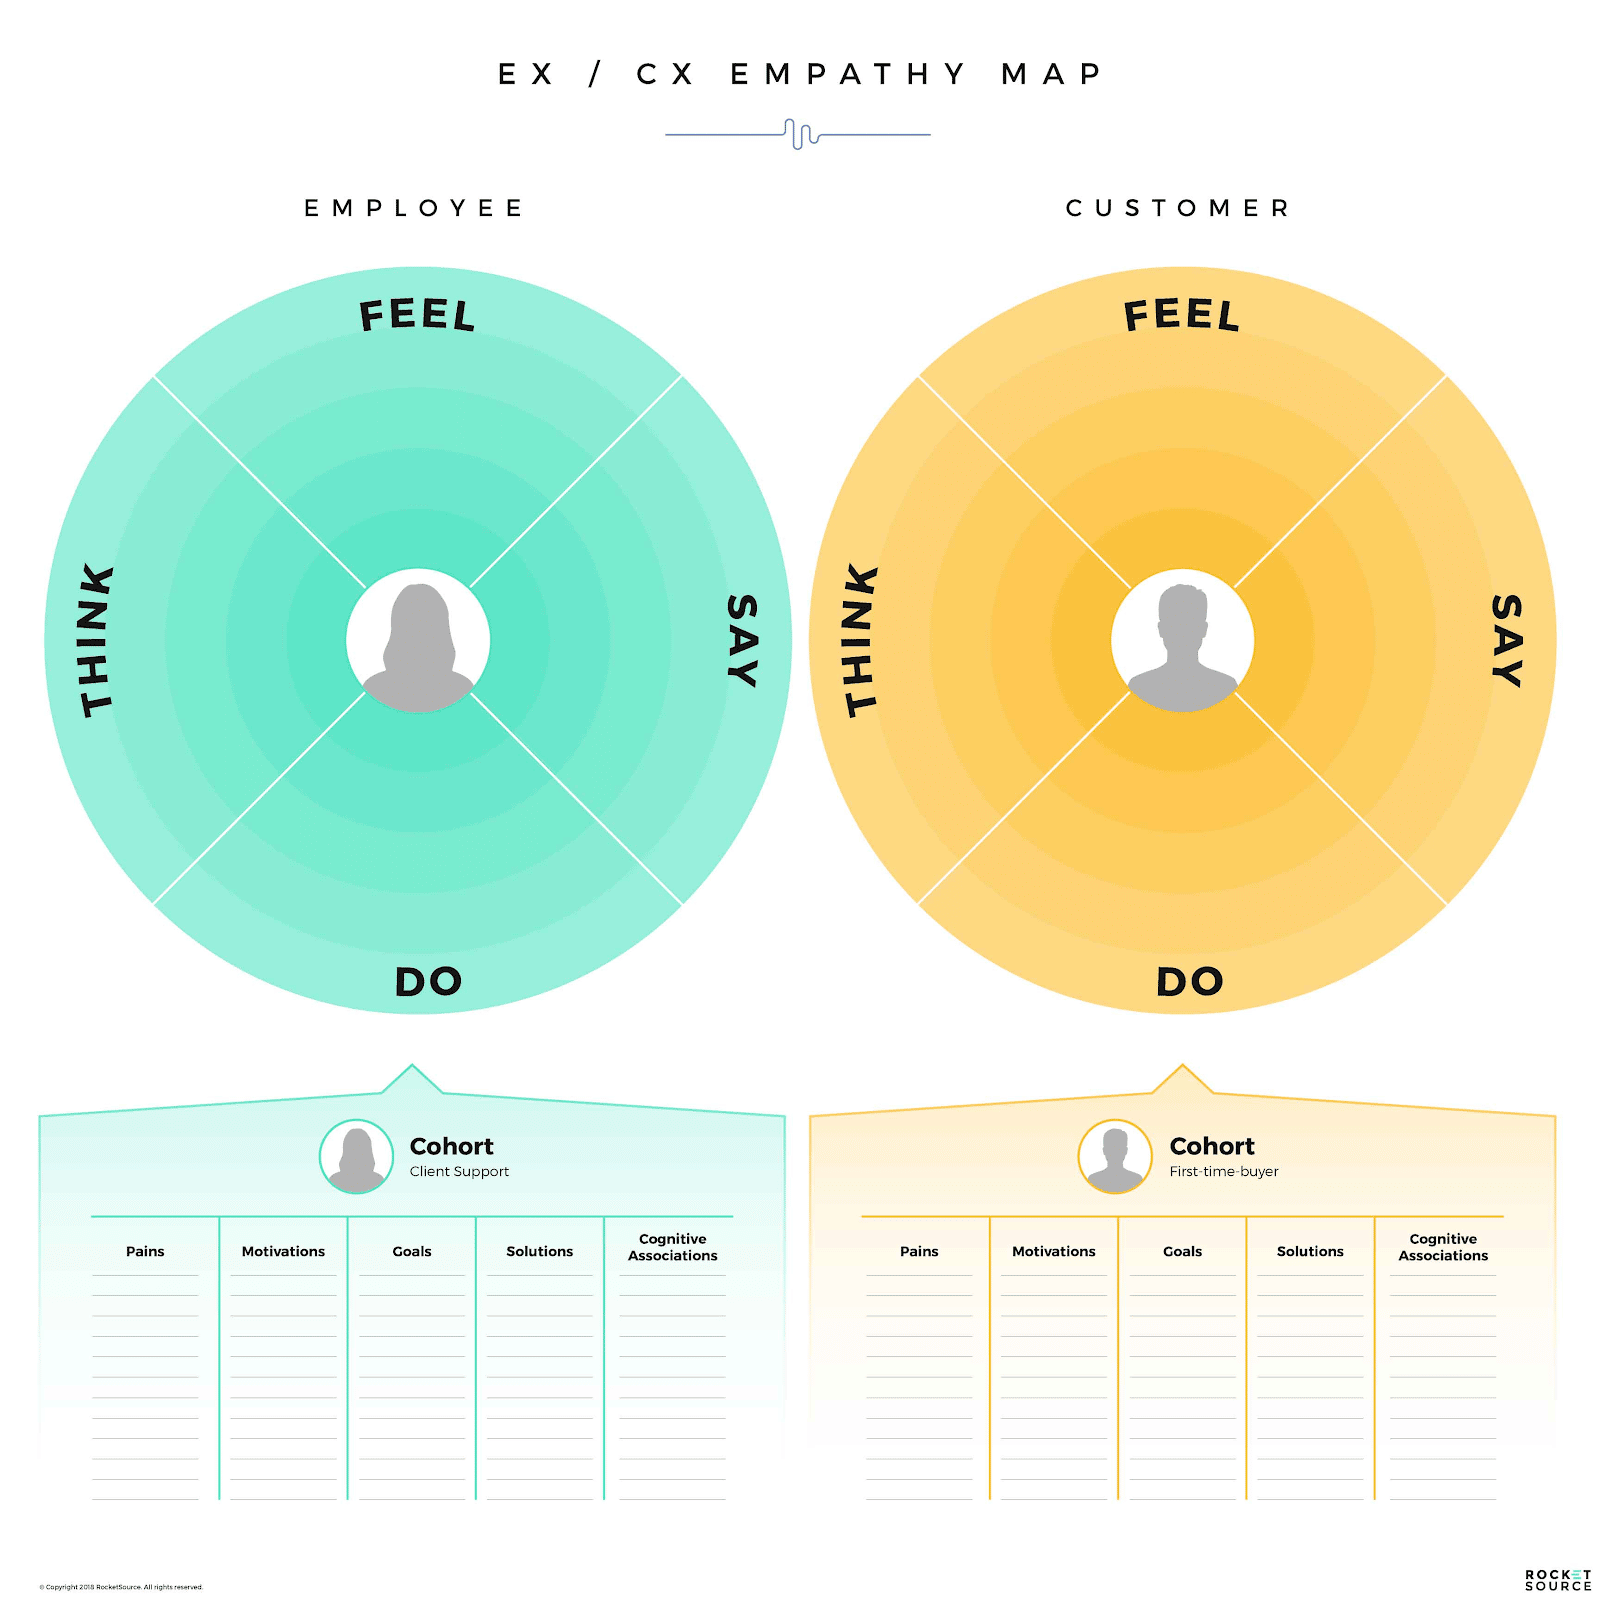 Empathy Mapping and Conversational Guidance